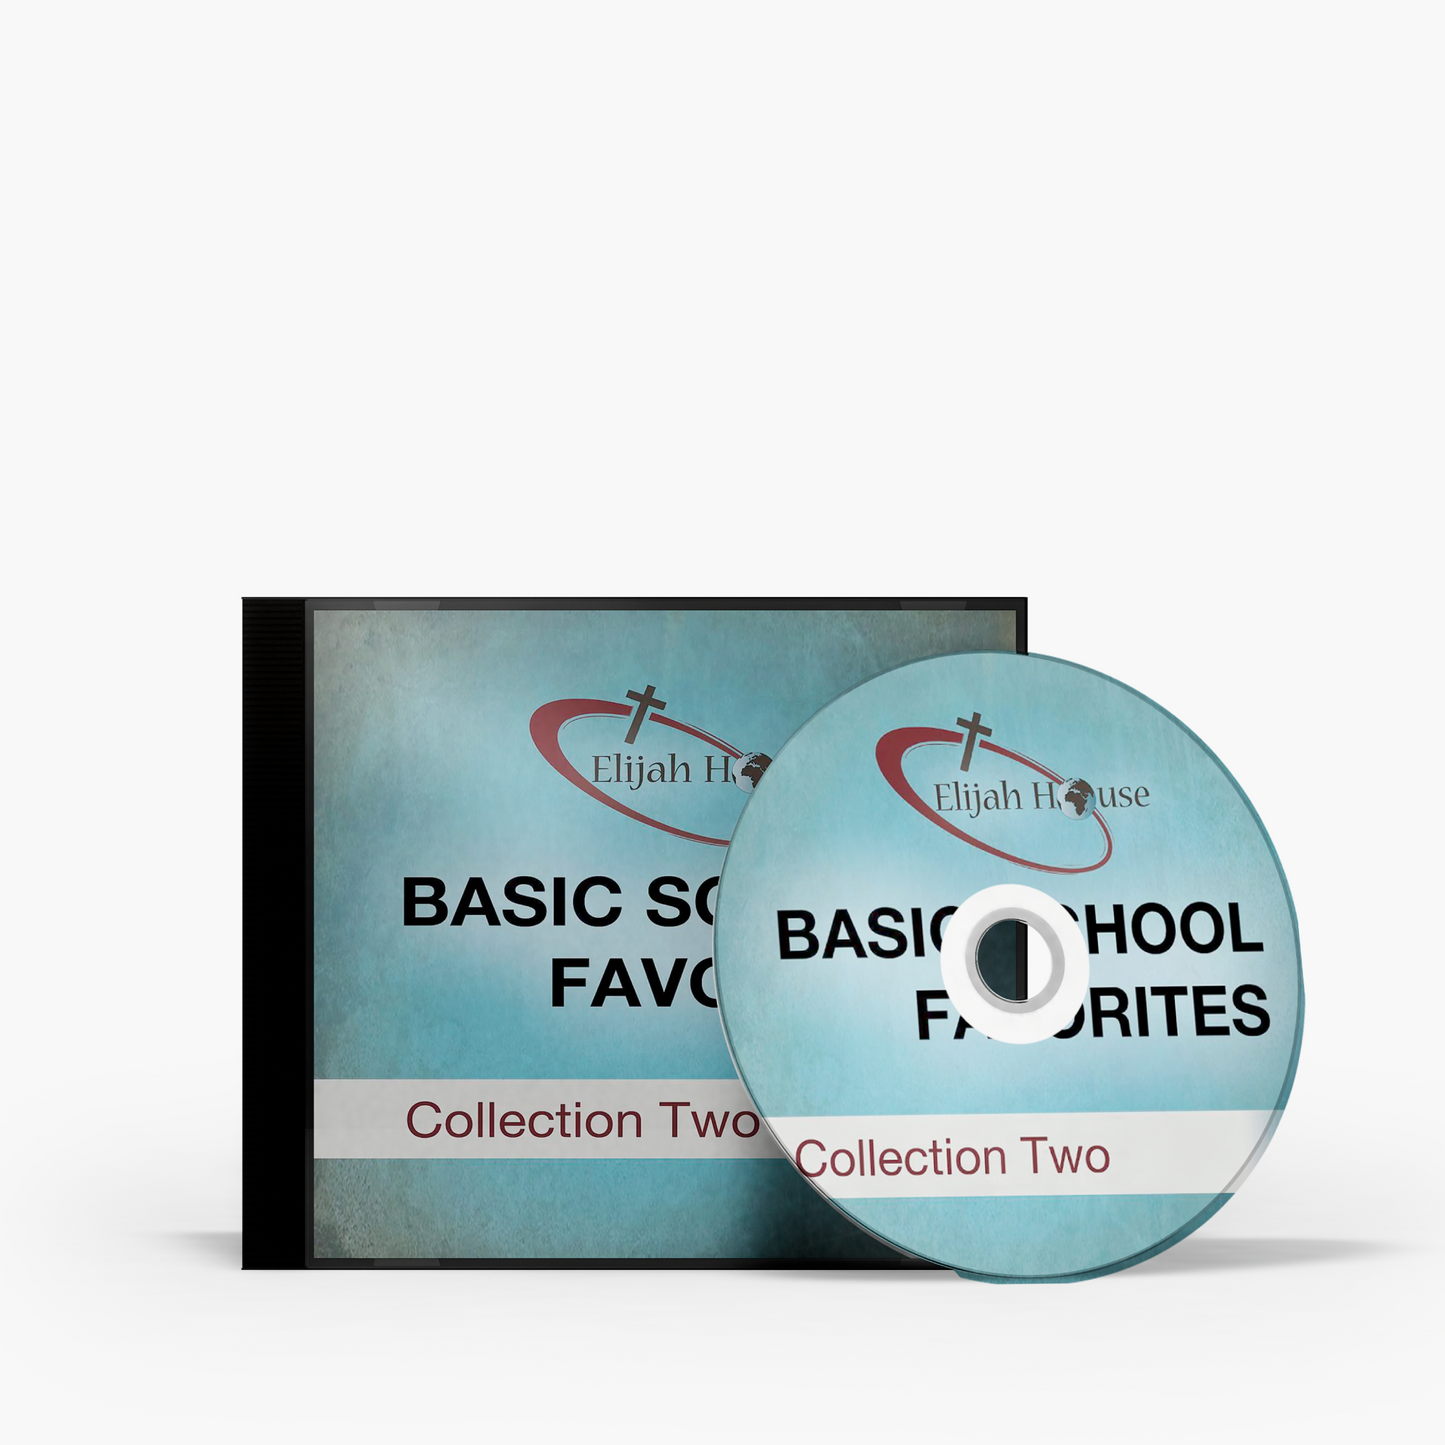 Basic School Favorites Collection Two DVD Set